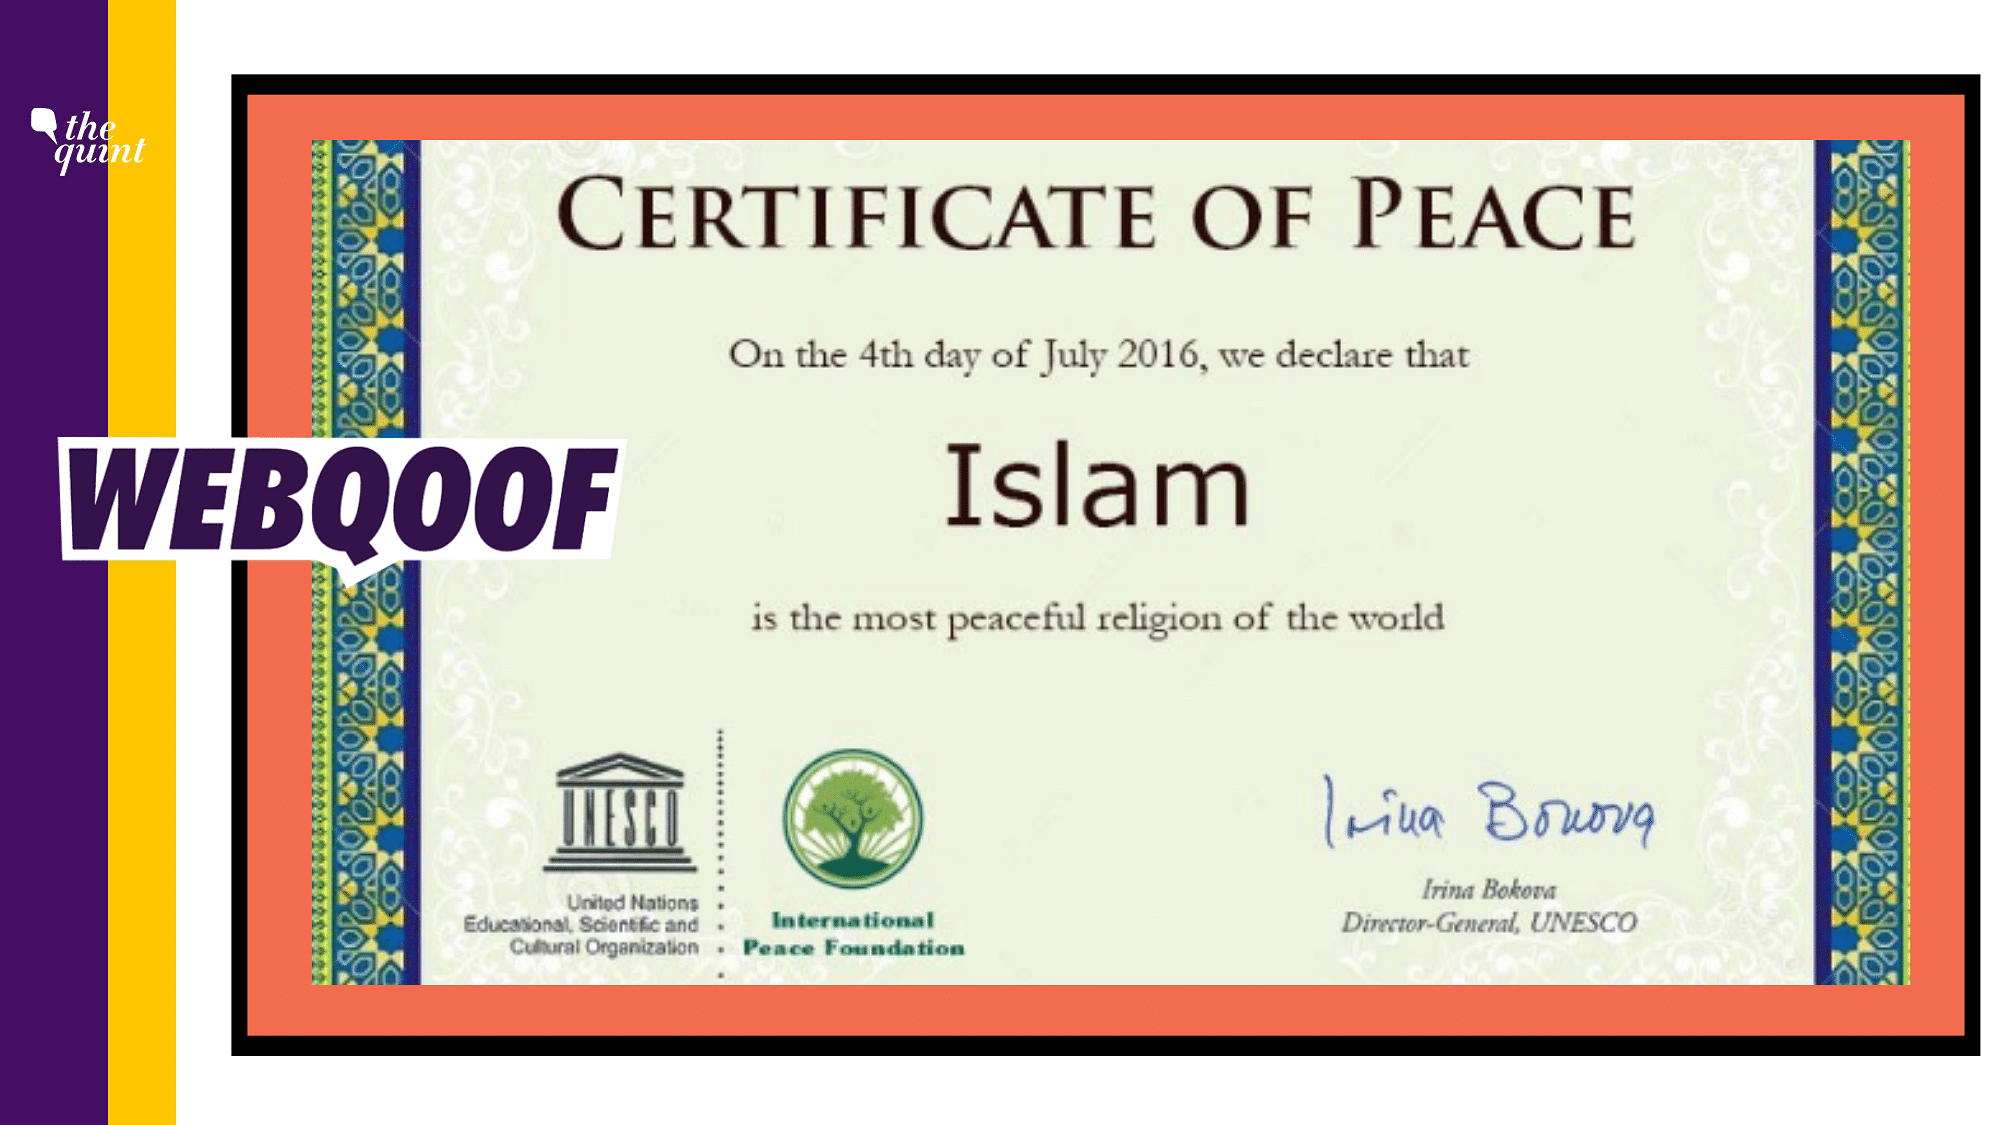 Several websites falsely claimed that UNESCO had declared Islam as the most peaceful religion of the world.